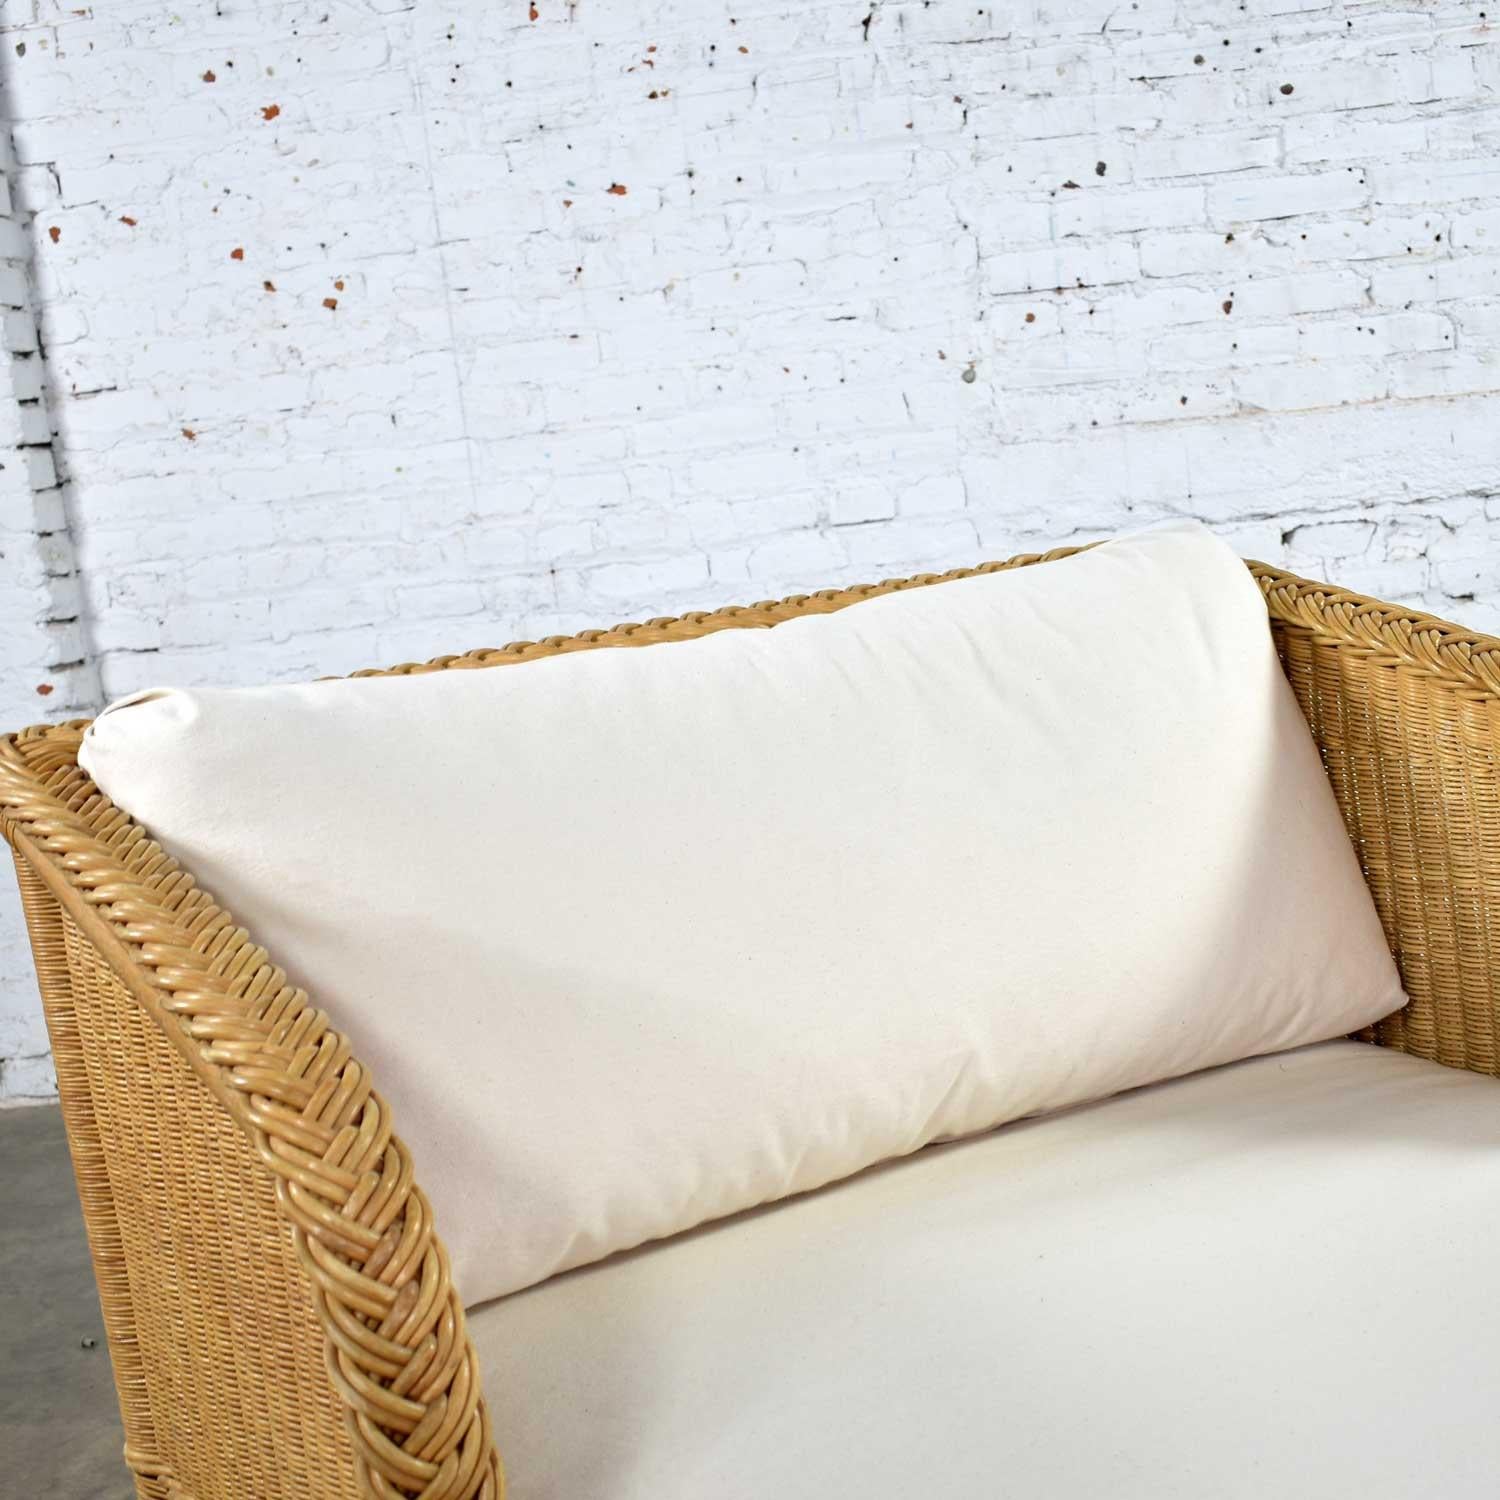 Wide Rattan Wicker Chaise by Bielecky Brothers, Inc. New White Canvas Upholstery 1